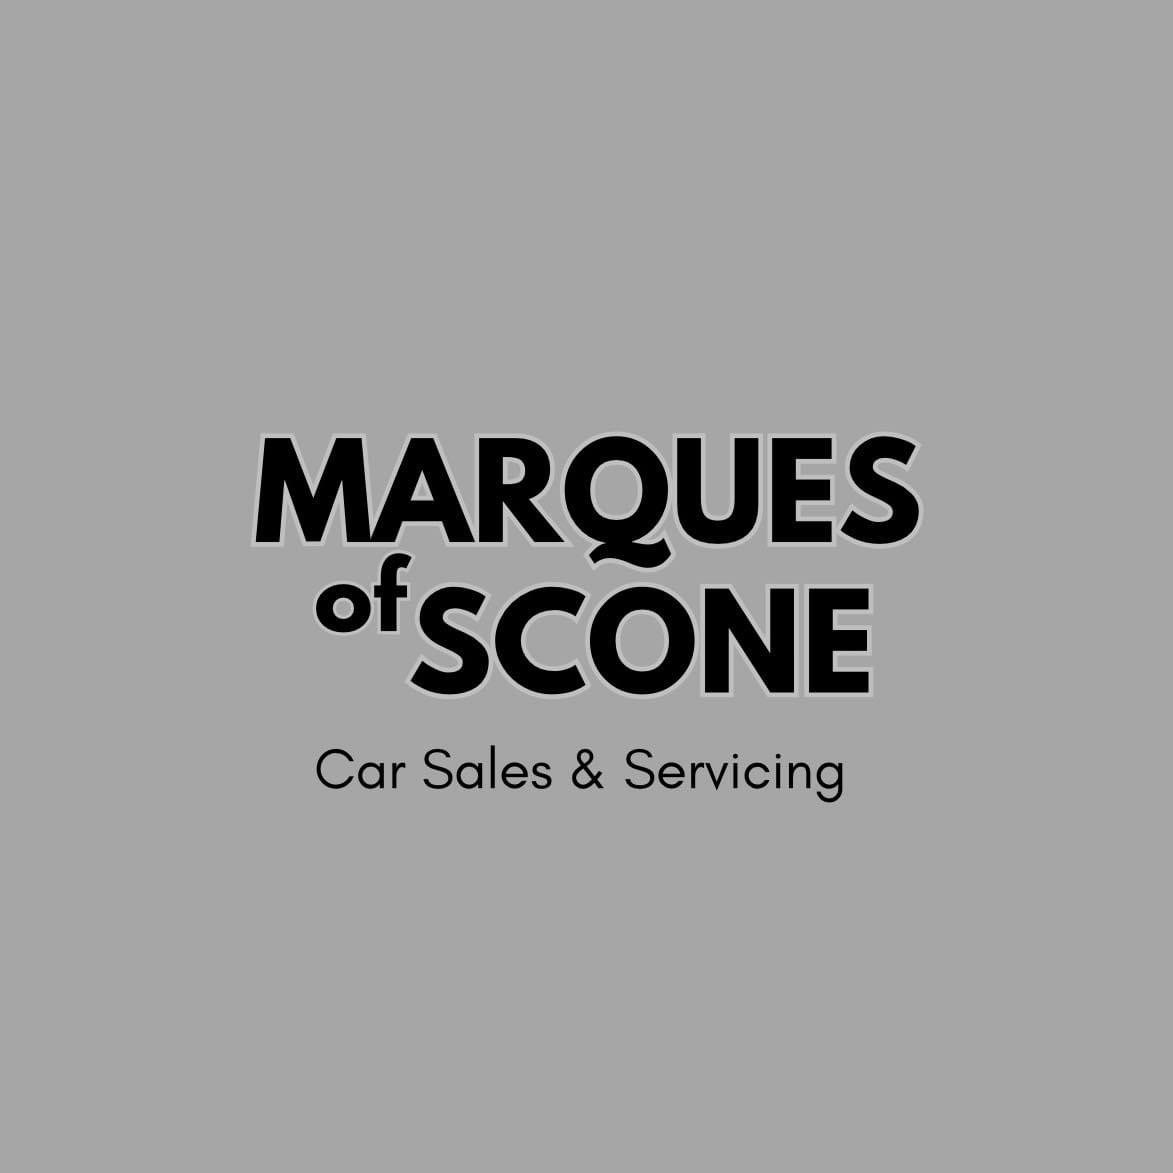 Marques of Scone logo